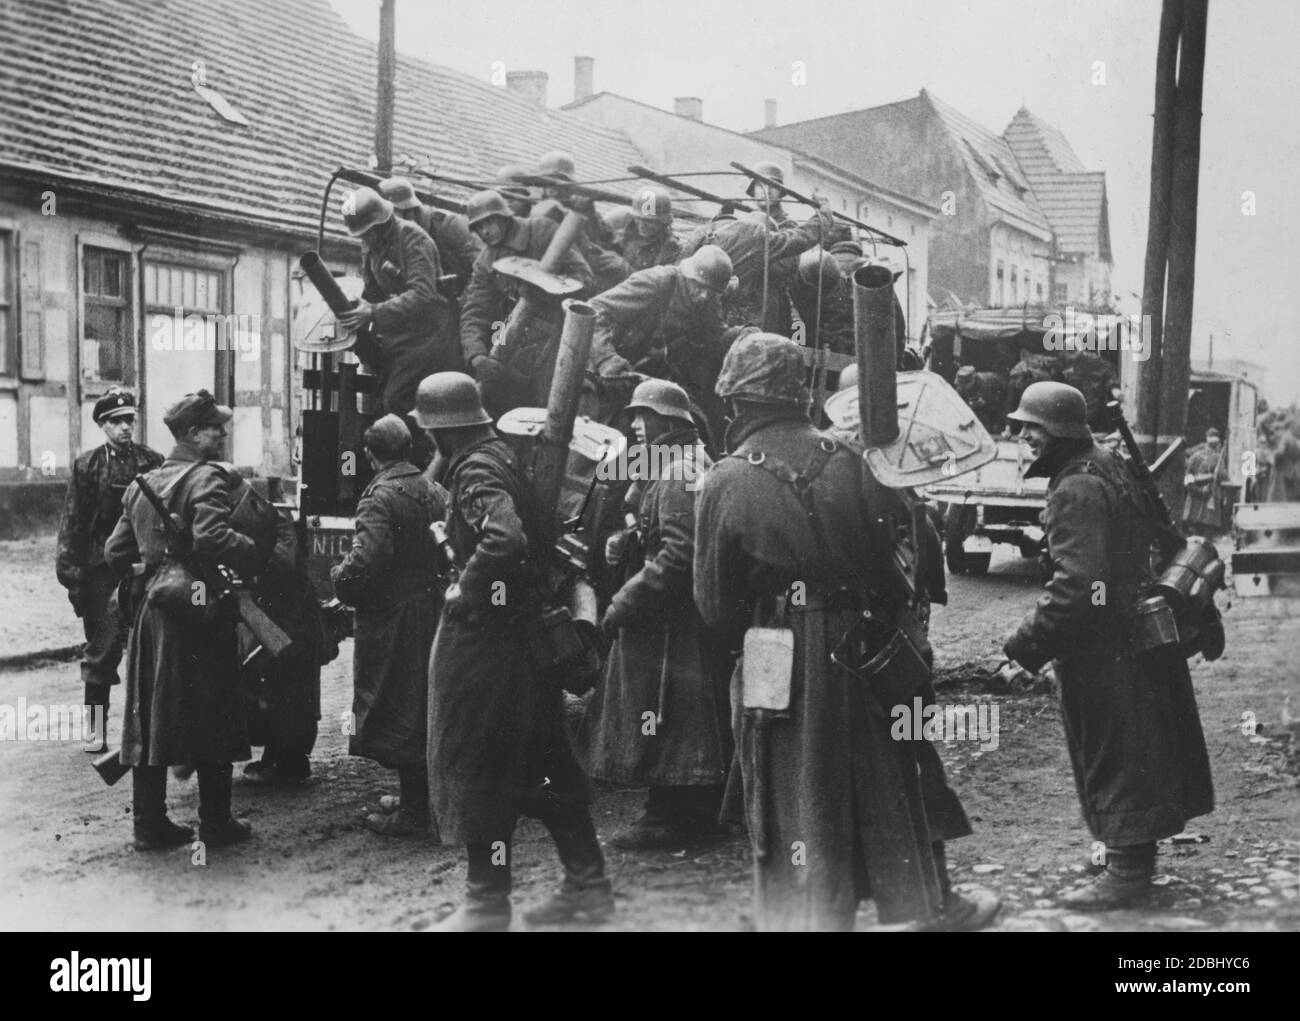 Soldiers of the Waffen-SS are getting off their trucks in a village in Pomerania. They are armed with bazookas of the type Panzerschreck. Photo: Kirsch. Stock Photo